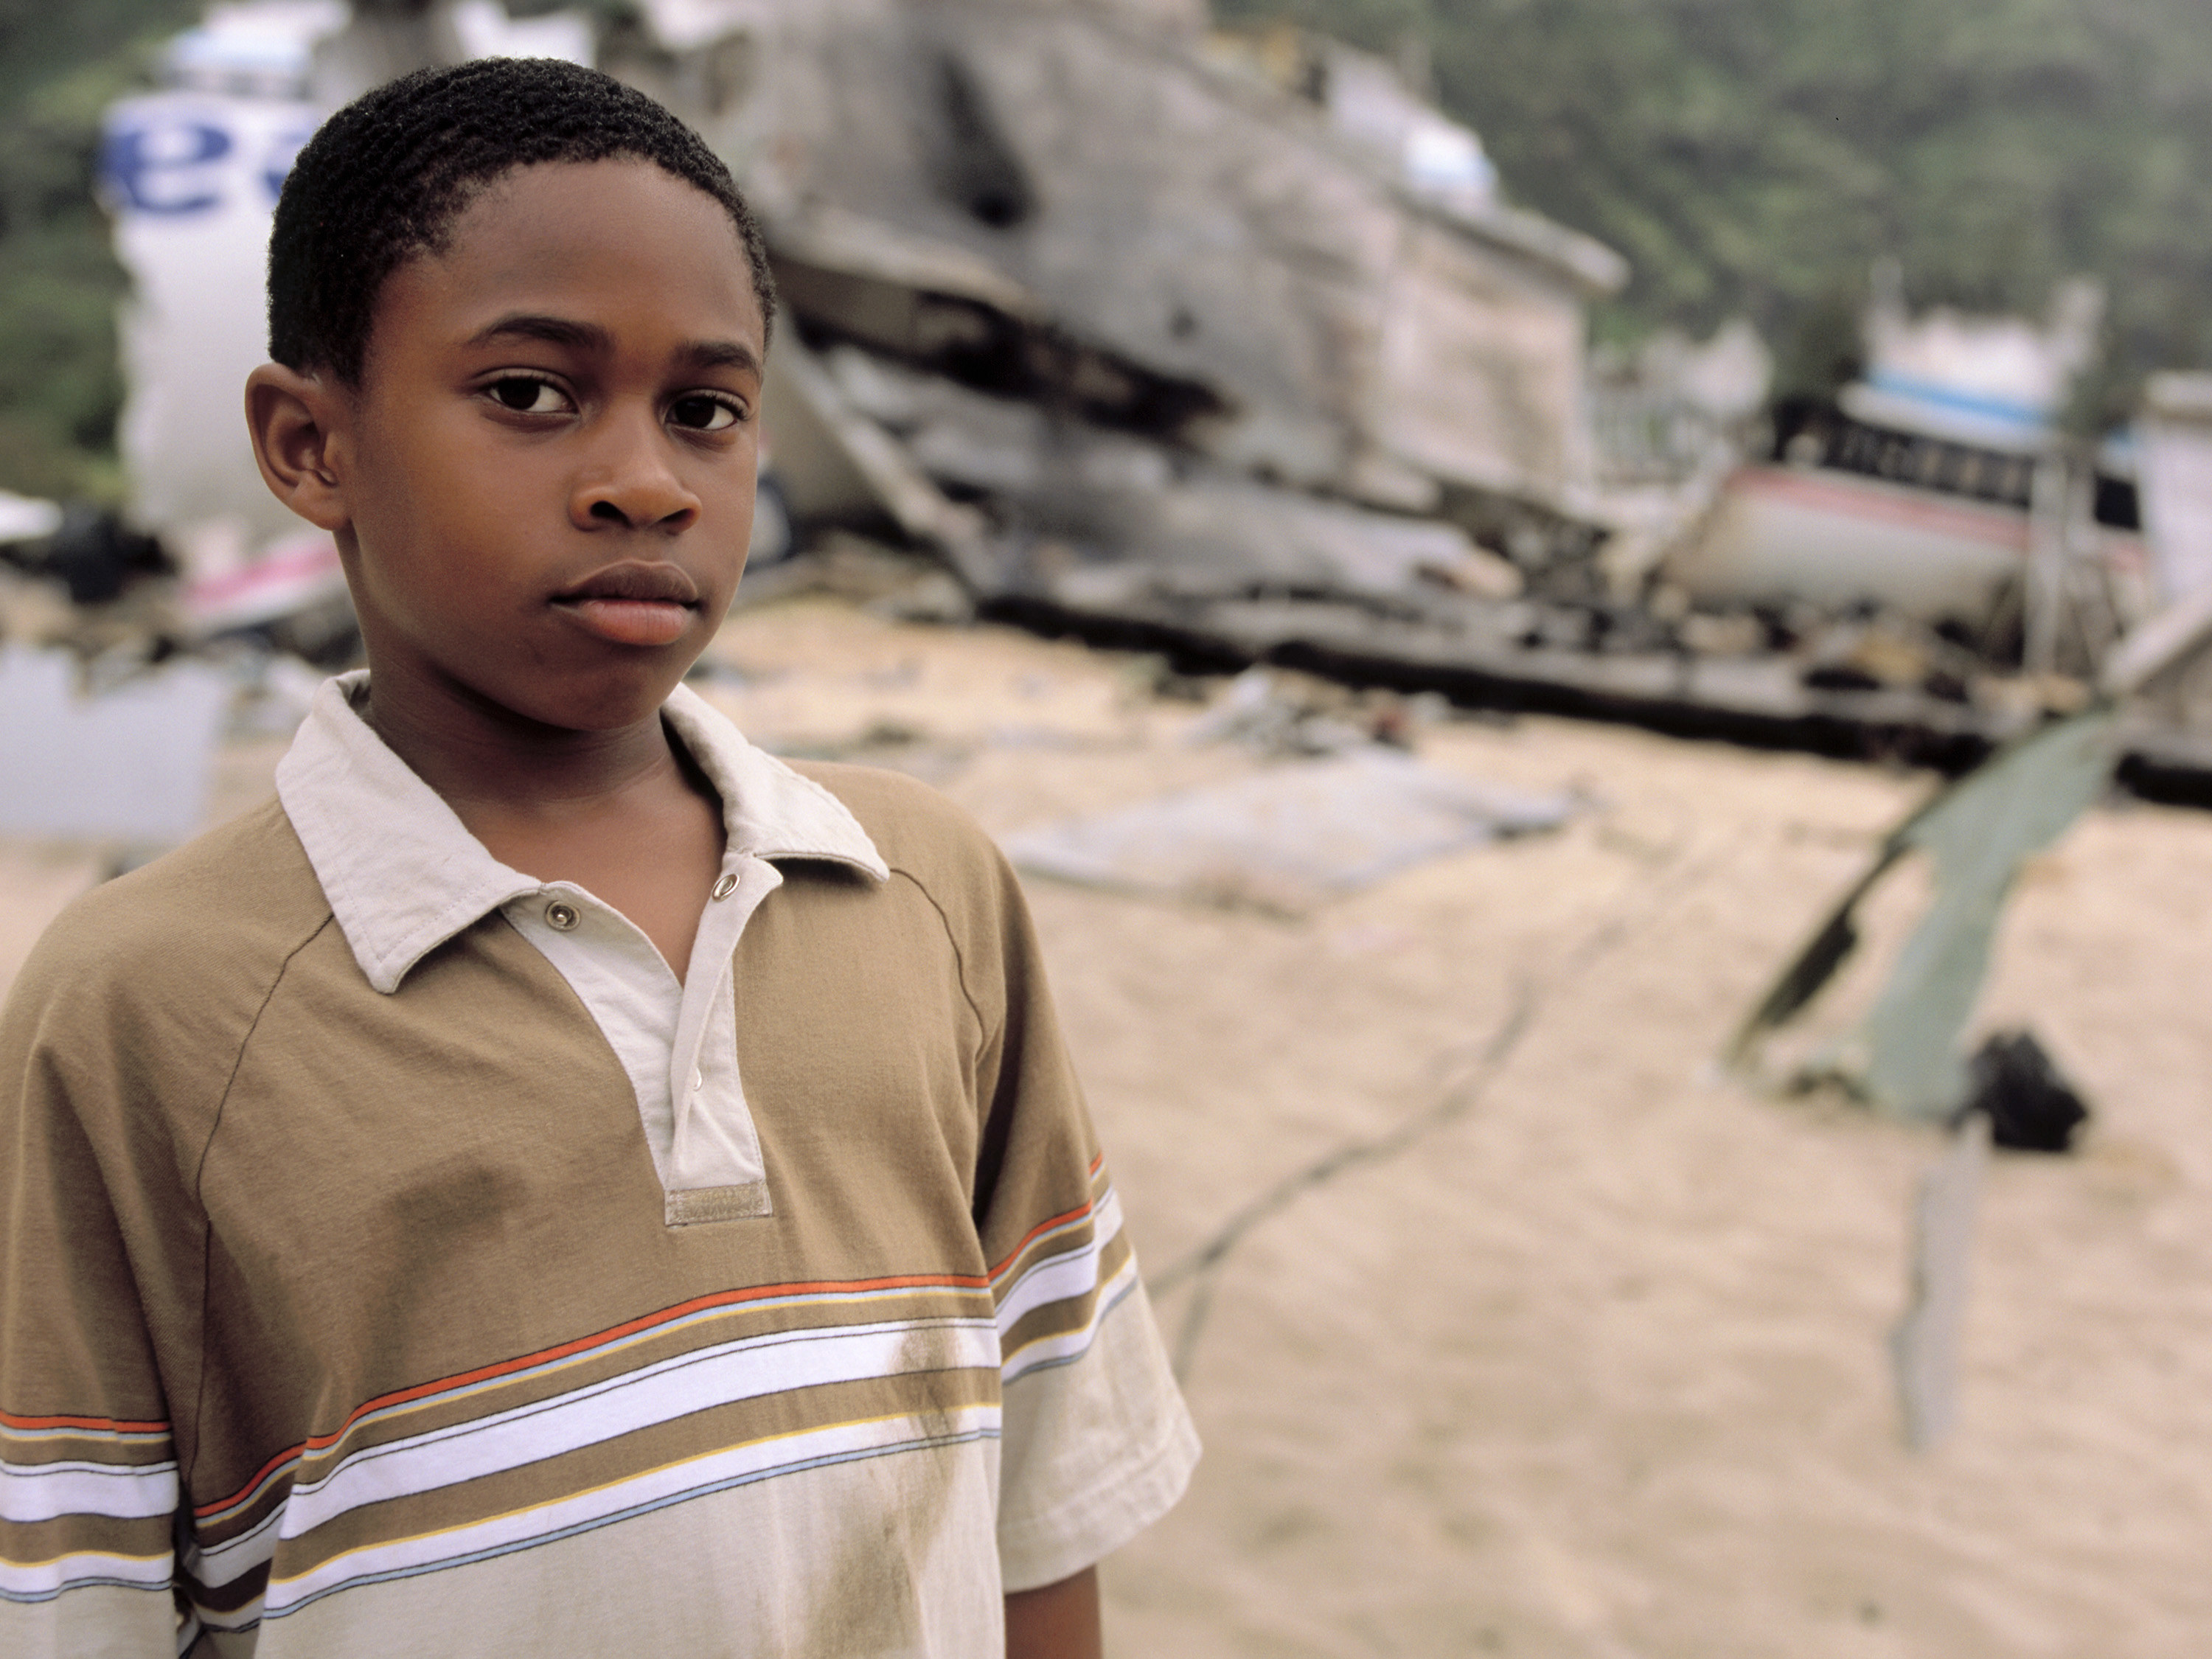 Malcolm as a child with the crashed plane in the background